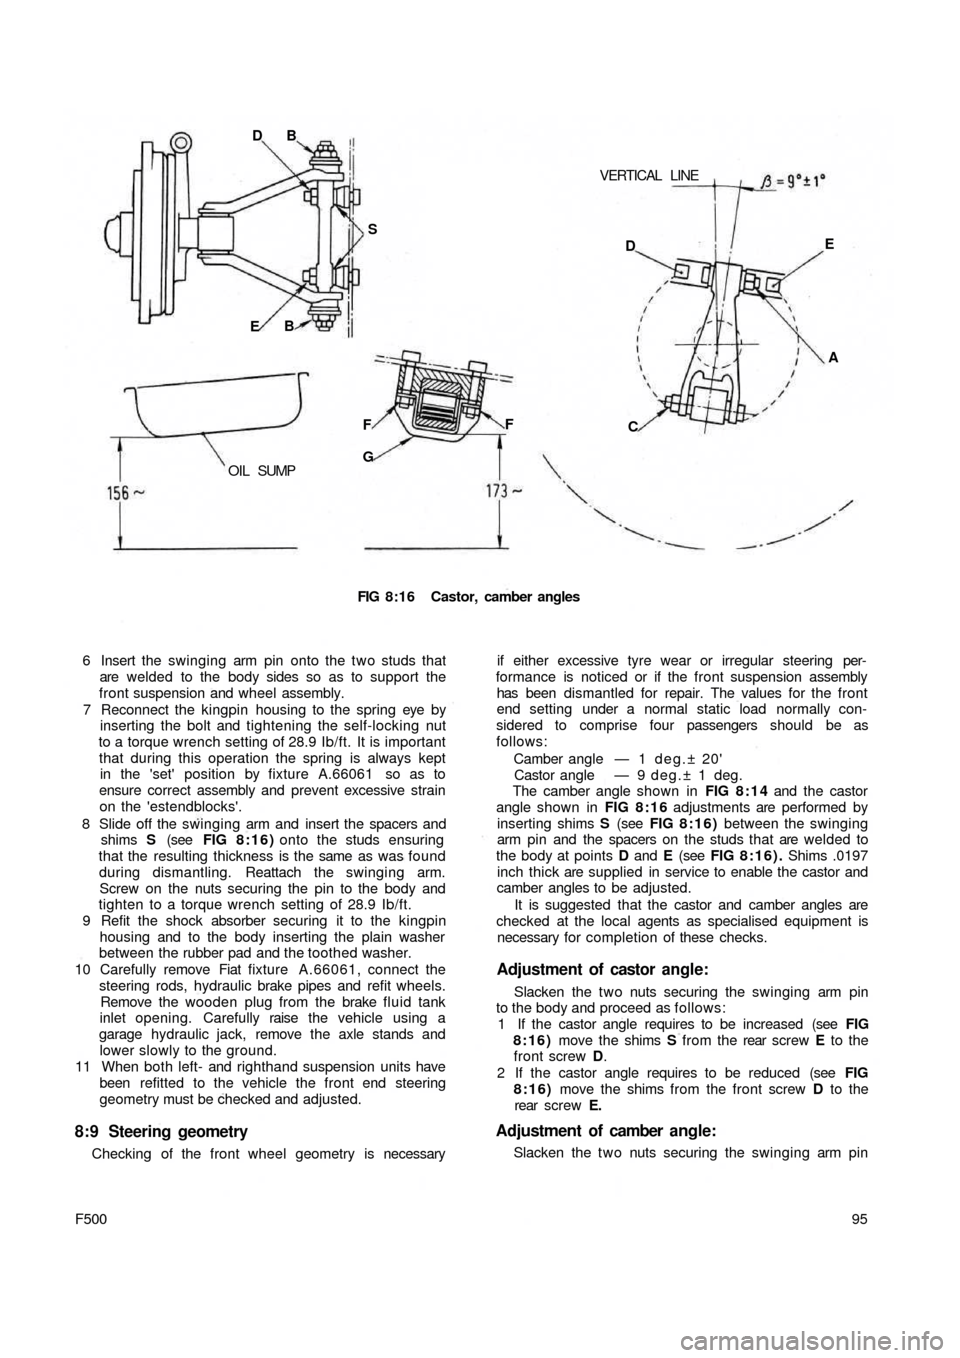 FIAT 500 1960 1.G Workshop Manual VERTICAL  LINE DB
S
EB
OIL  SUMPF
GF
FIG 8:16 Castor, camber angles
6 Insert the swinging arm pin onto the two studs that
are welded  to the  body sides so as to support the
front suspension and wheel